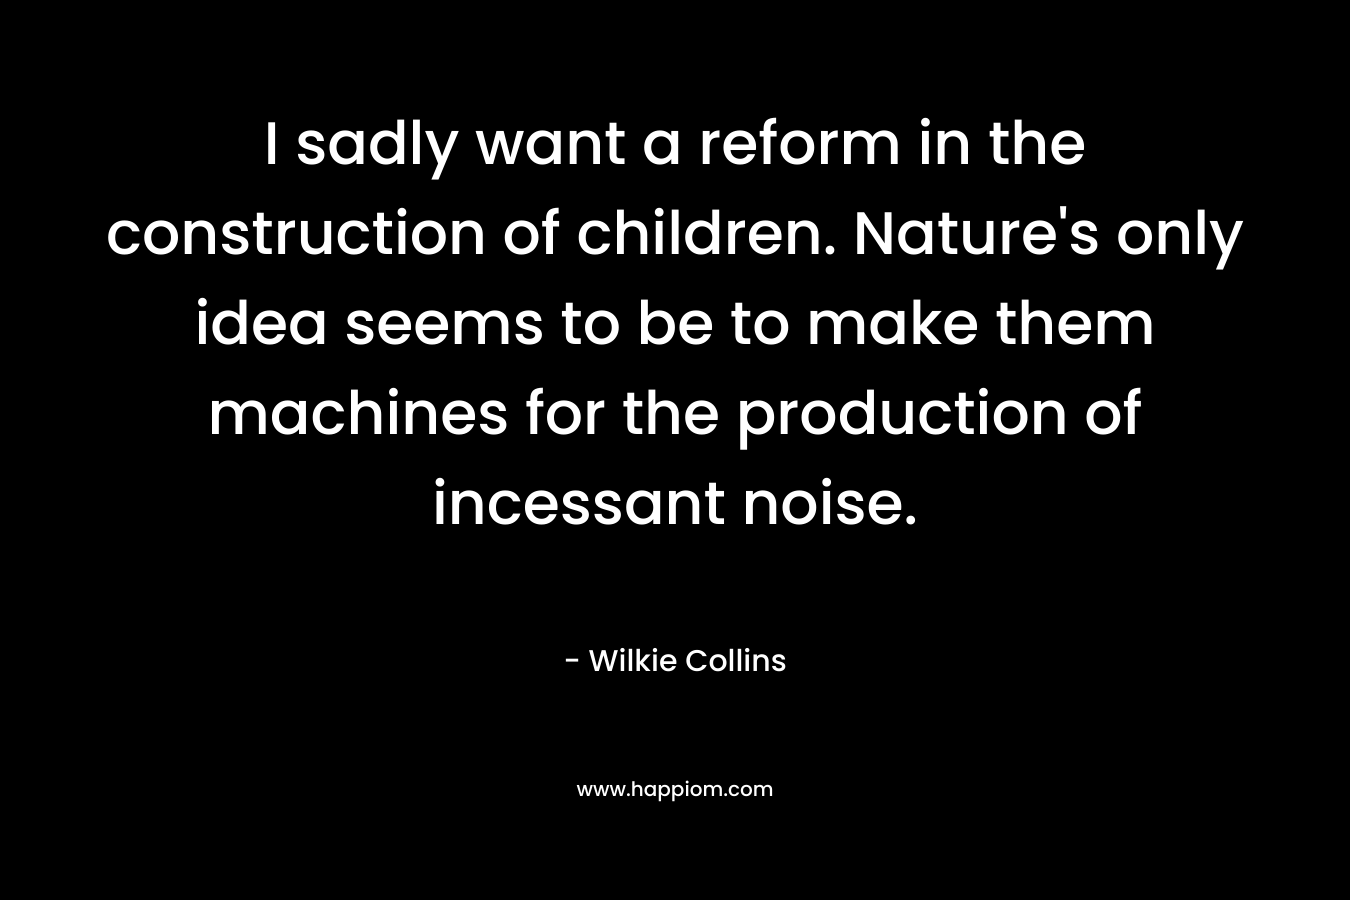 I sadly want a reform in the construction of children. Nature’s only idea seems to be to make them machines for the production of incessant noise. – Wilkie Collins